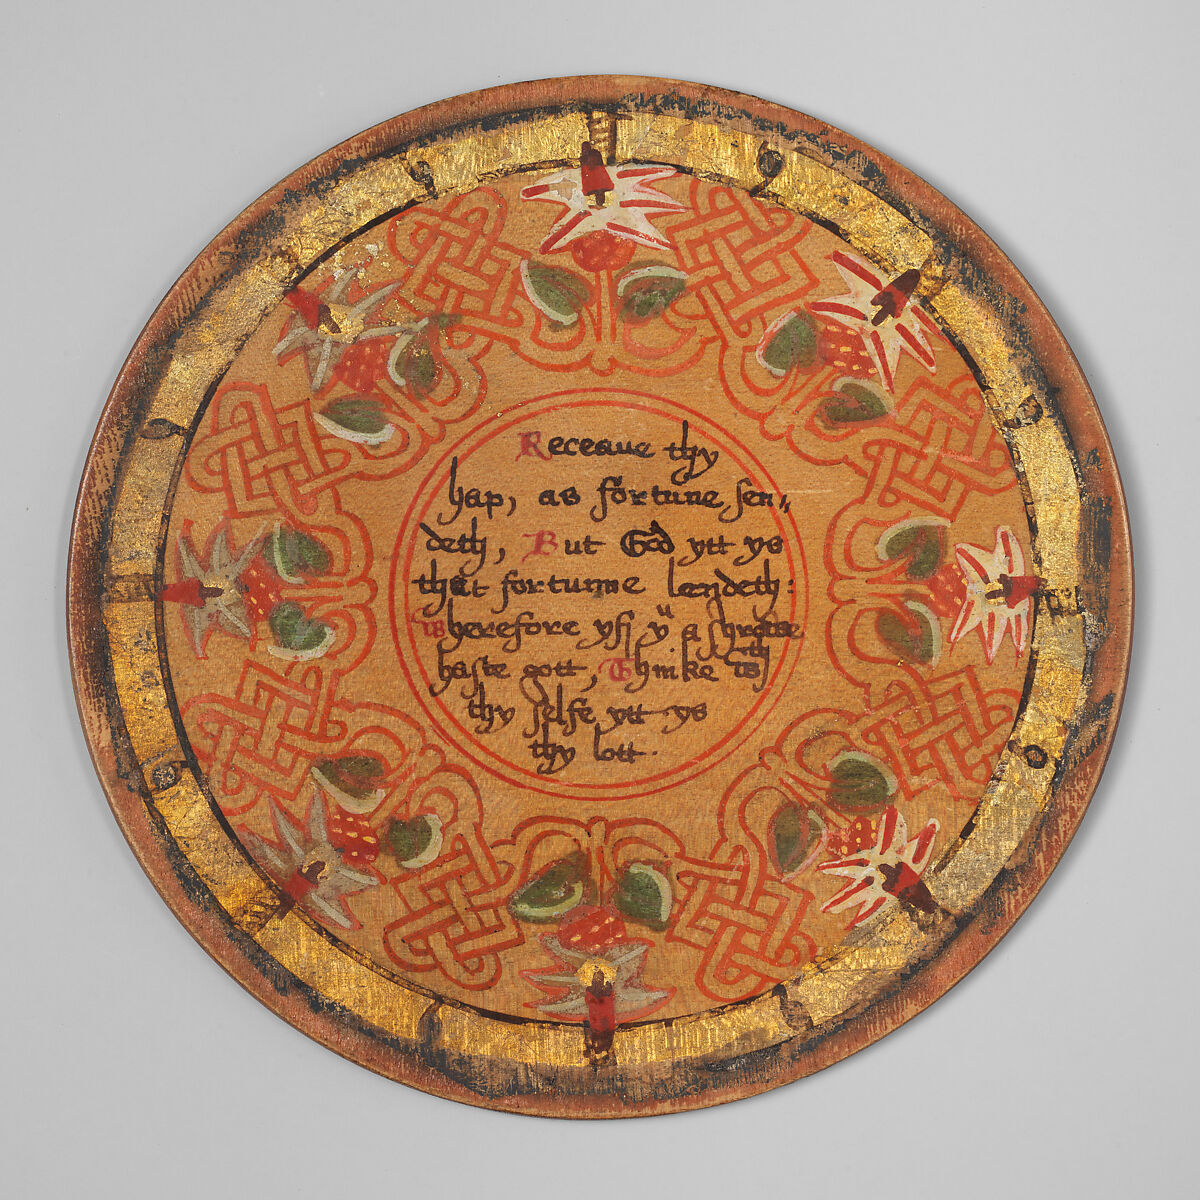 Trencher (one of a set), Oak and sycamore woods, painted, silvered and yellow varnished; inscription: ink (animal or vegetable), British